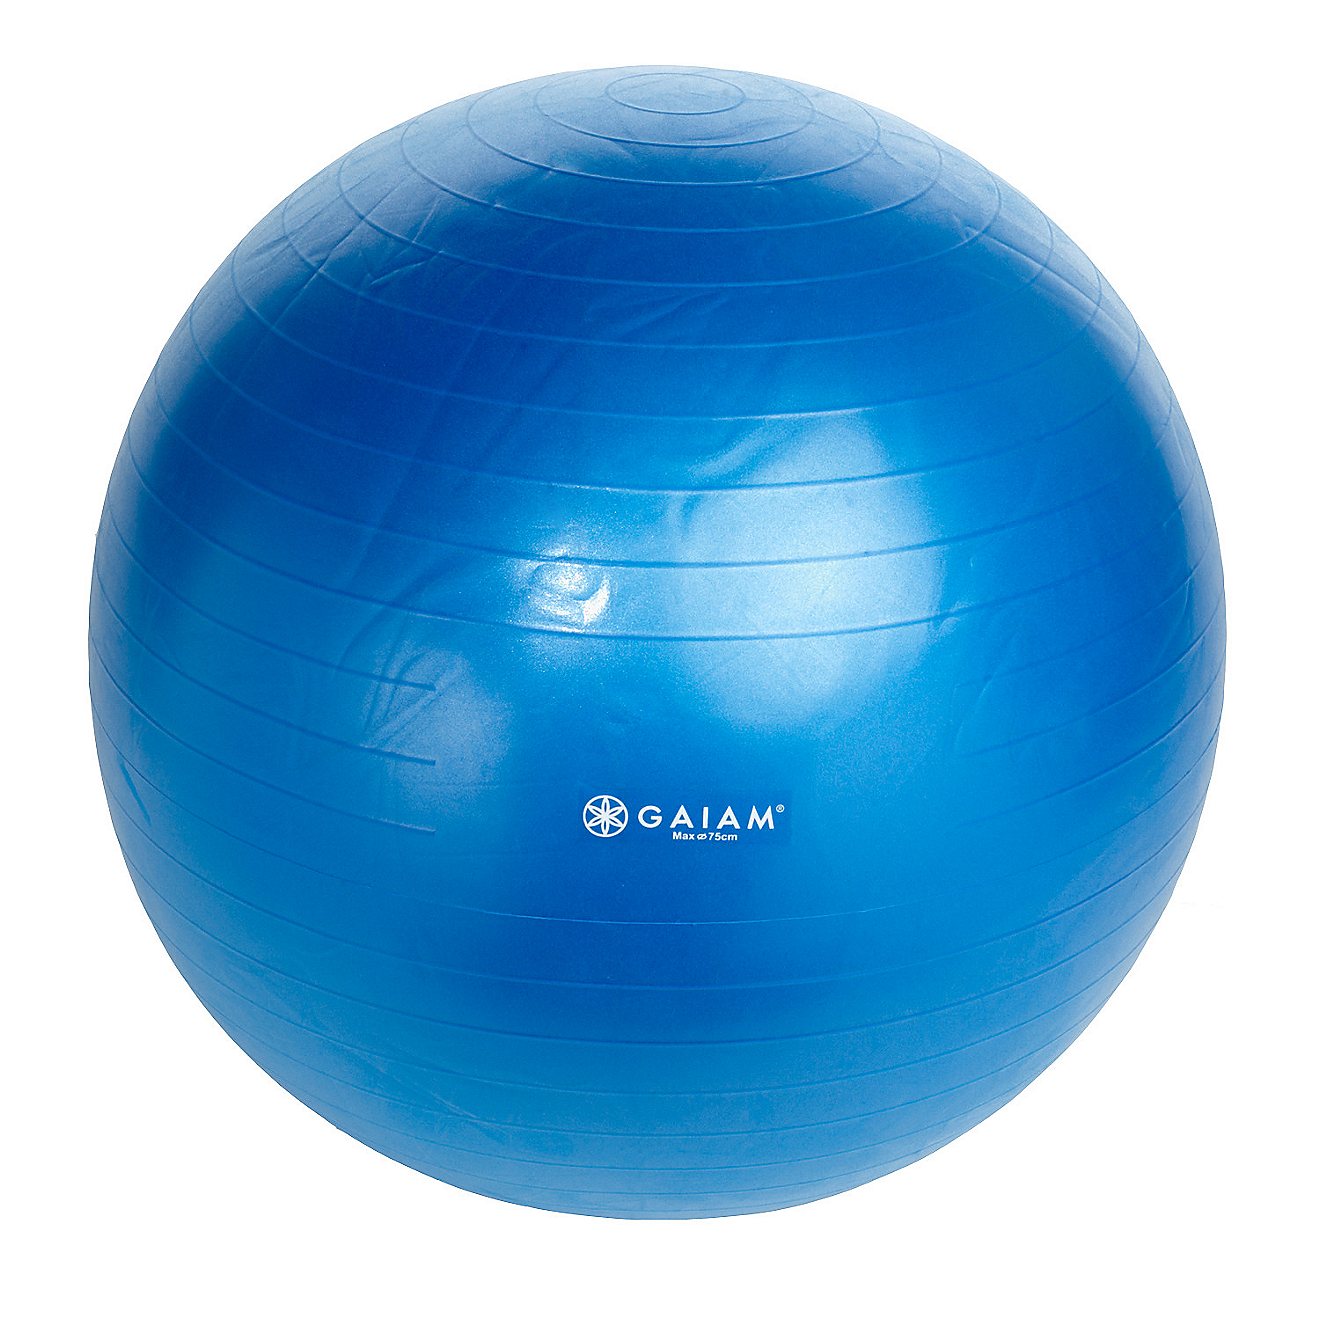 Gaiam Eco Total Body 75 cm Balance Ball Kit                                                                                      - view number 1